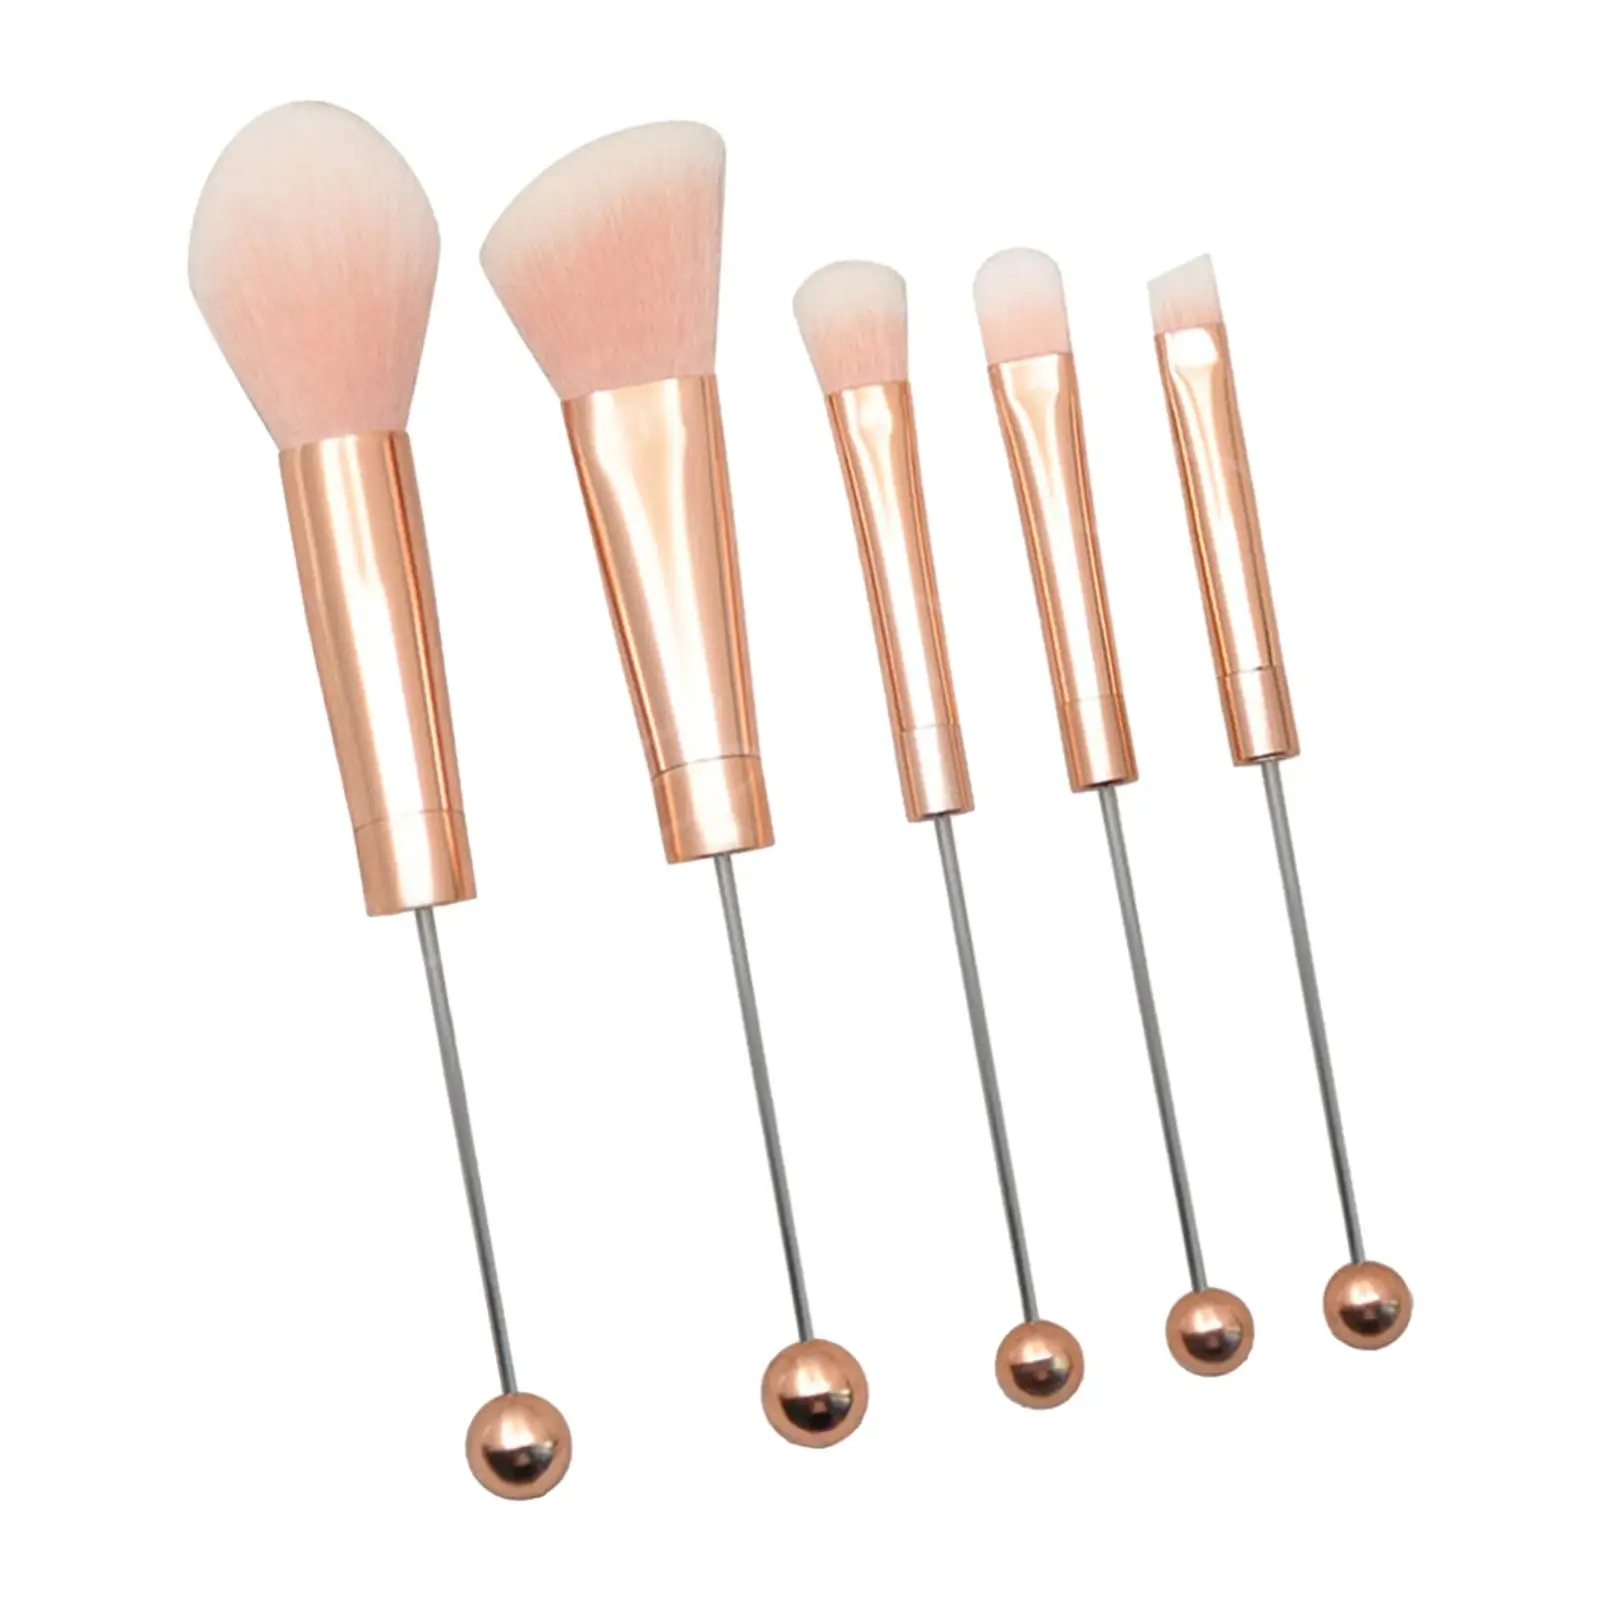 5 Pieces Makeup Brushes Set Multifunctional Blush Brush Make up Brushes Tool Kits Professional for Lady Sister Birthday Gifts